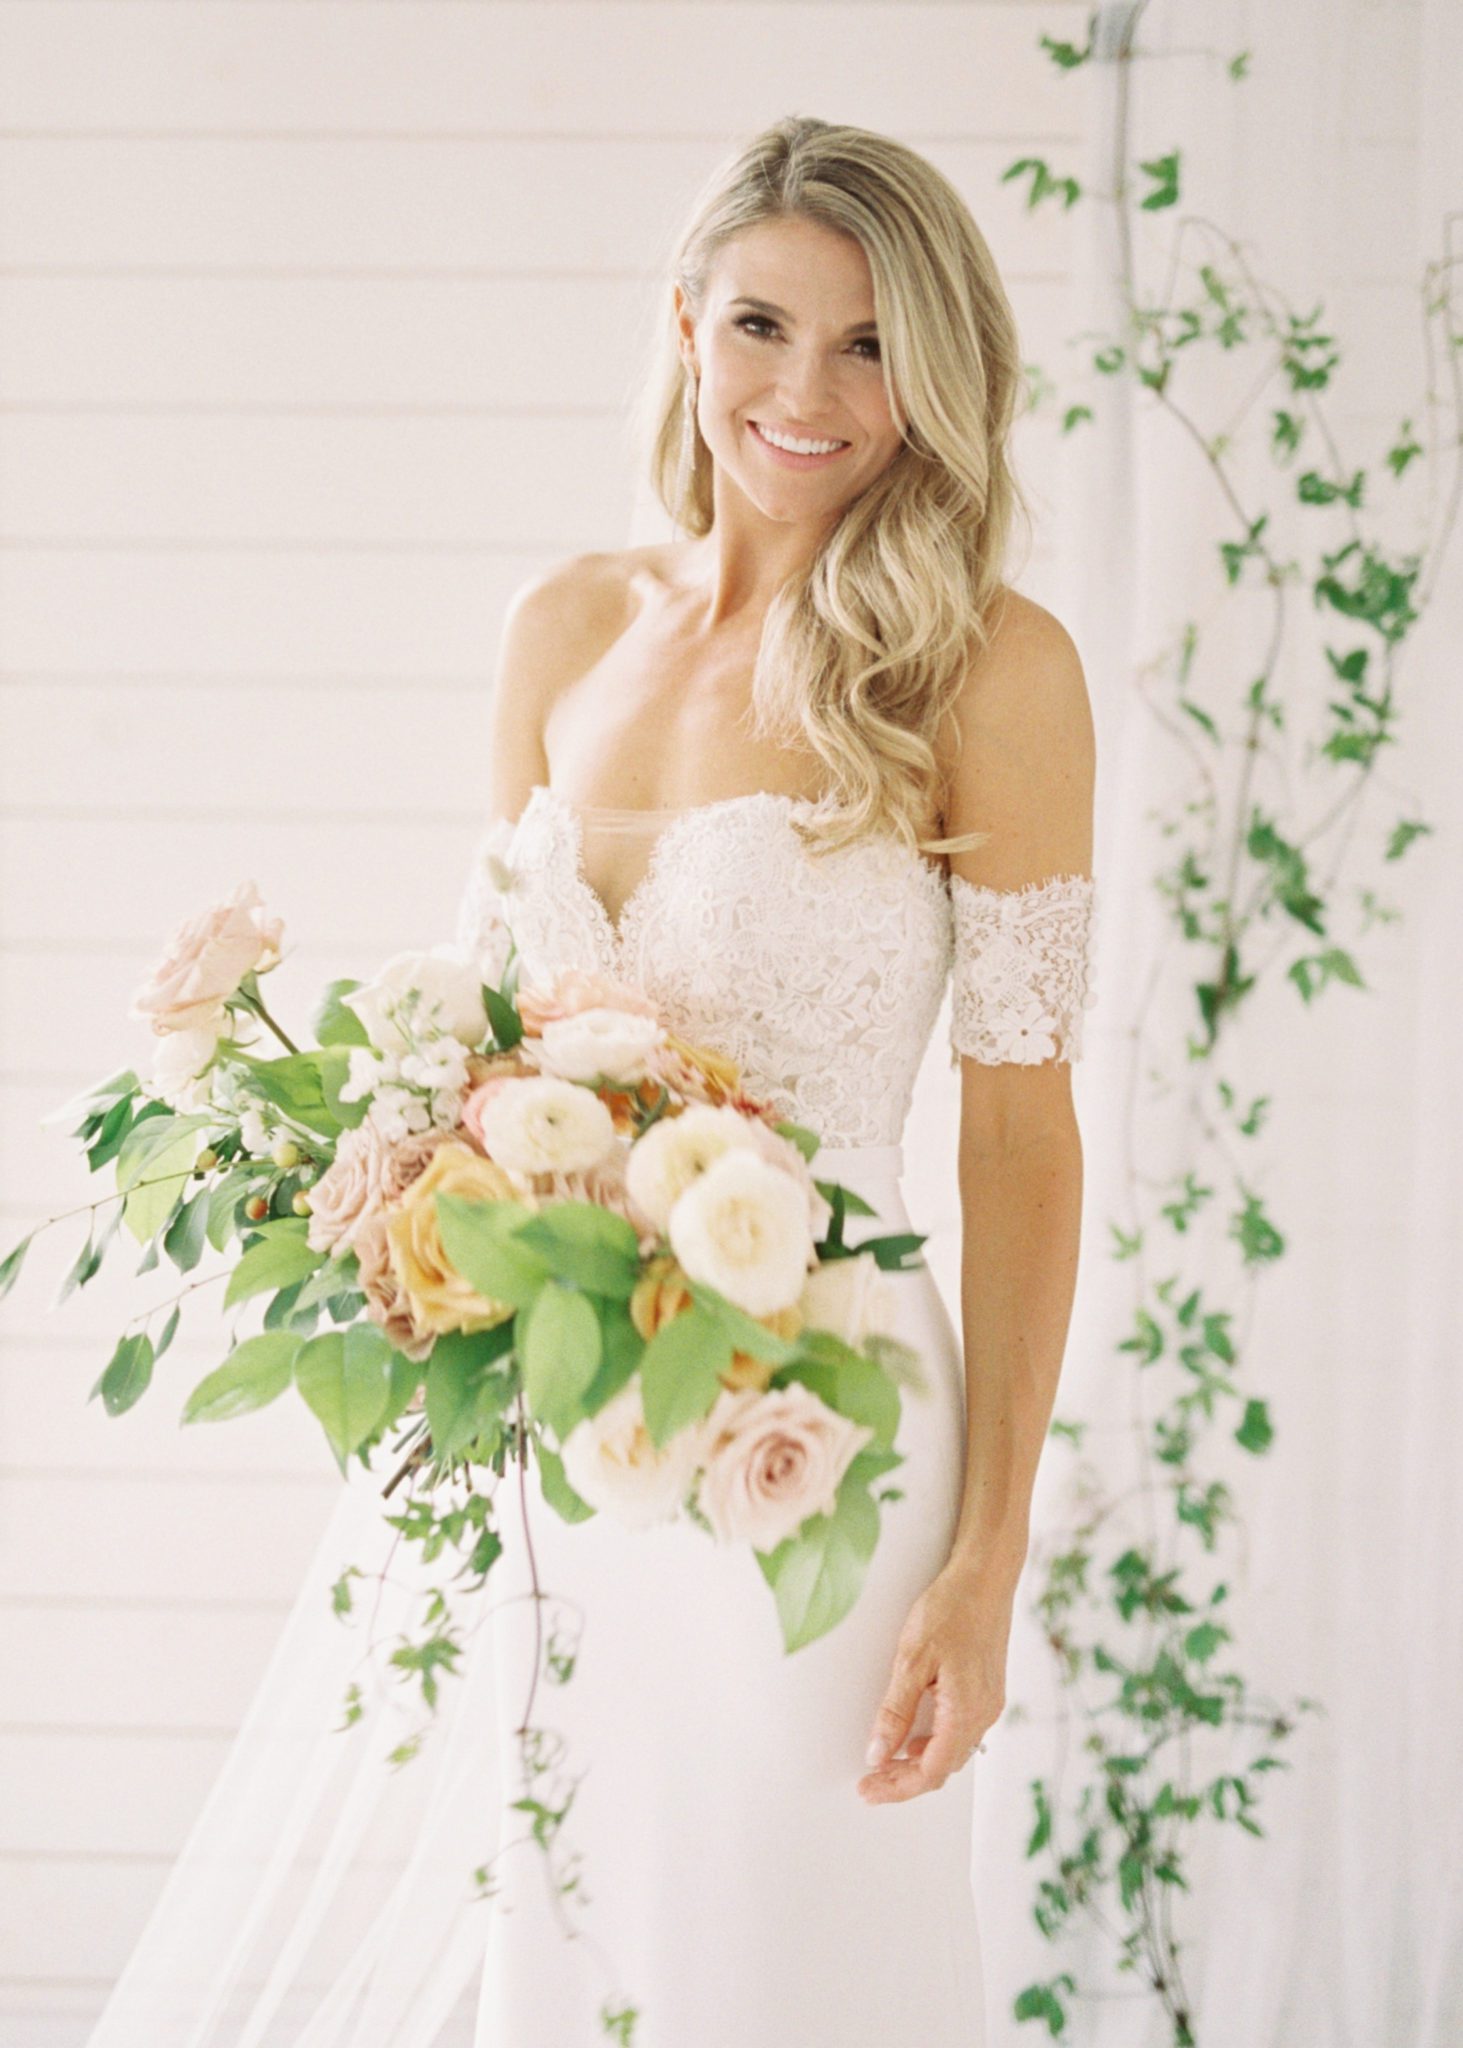 Romantic and classic bridal styling